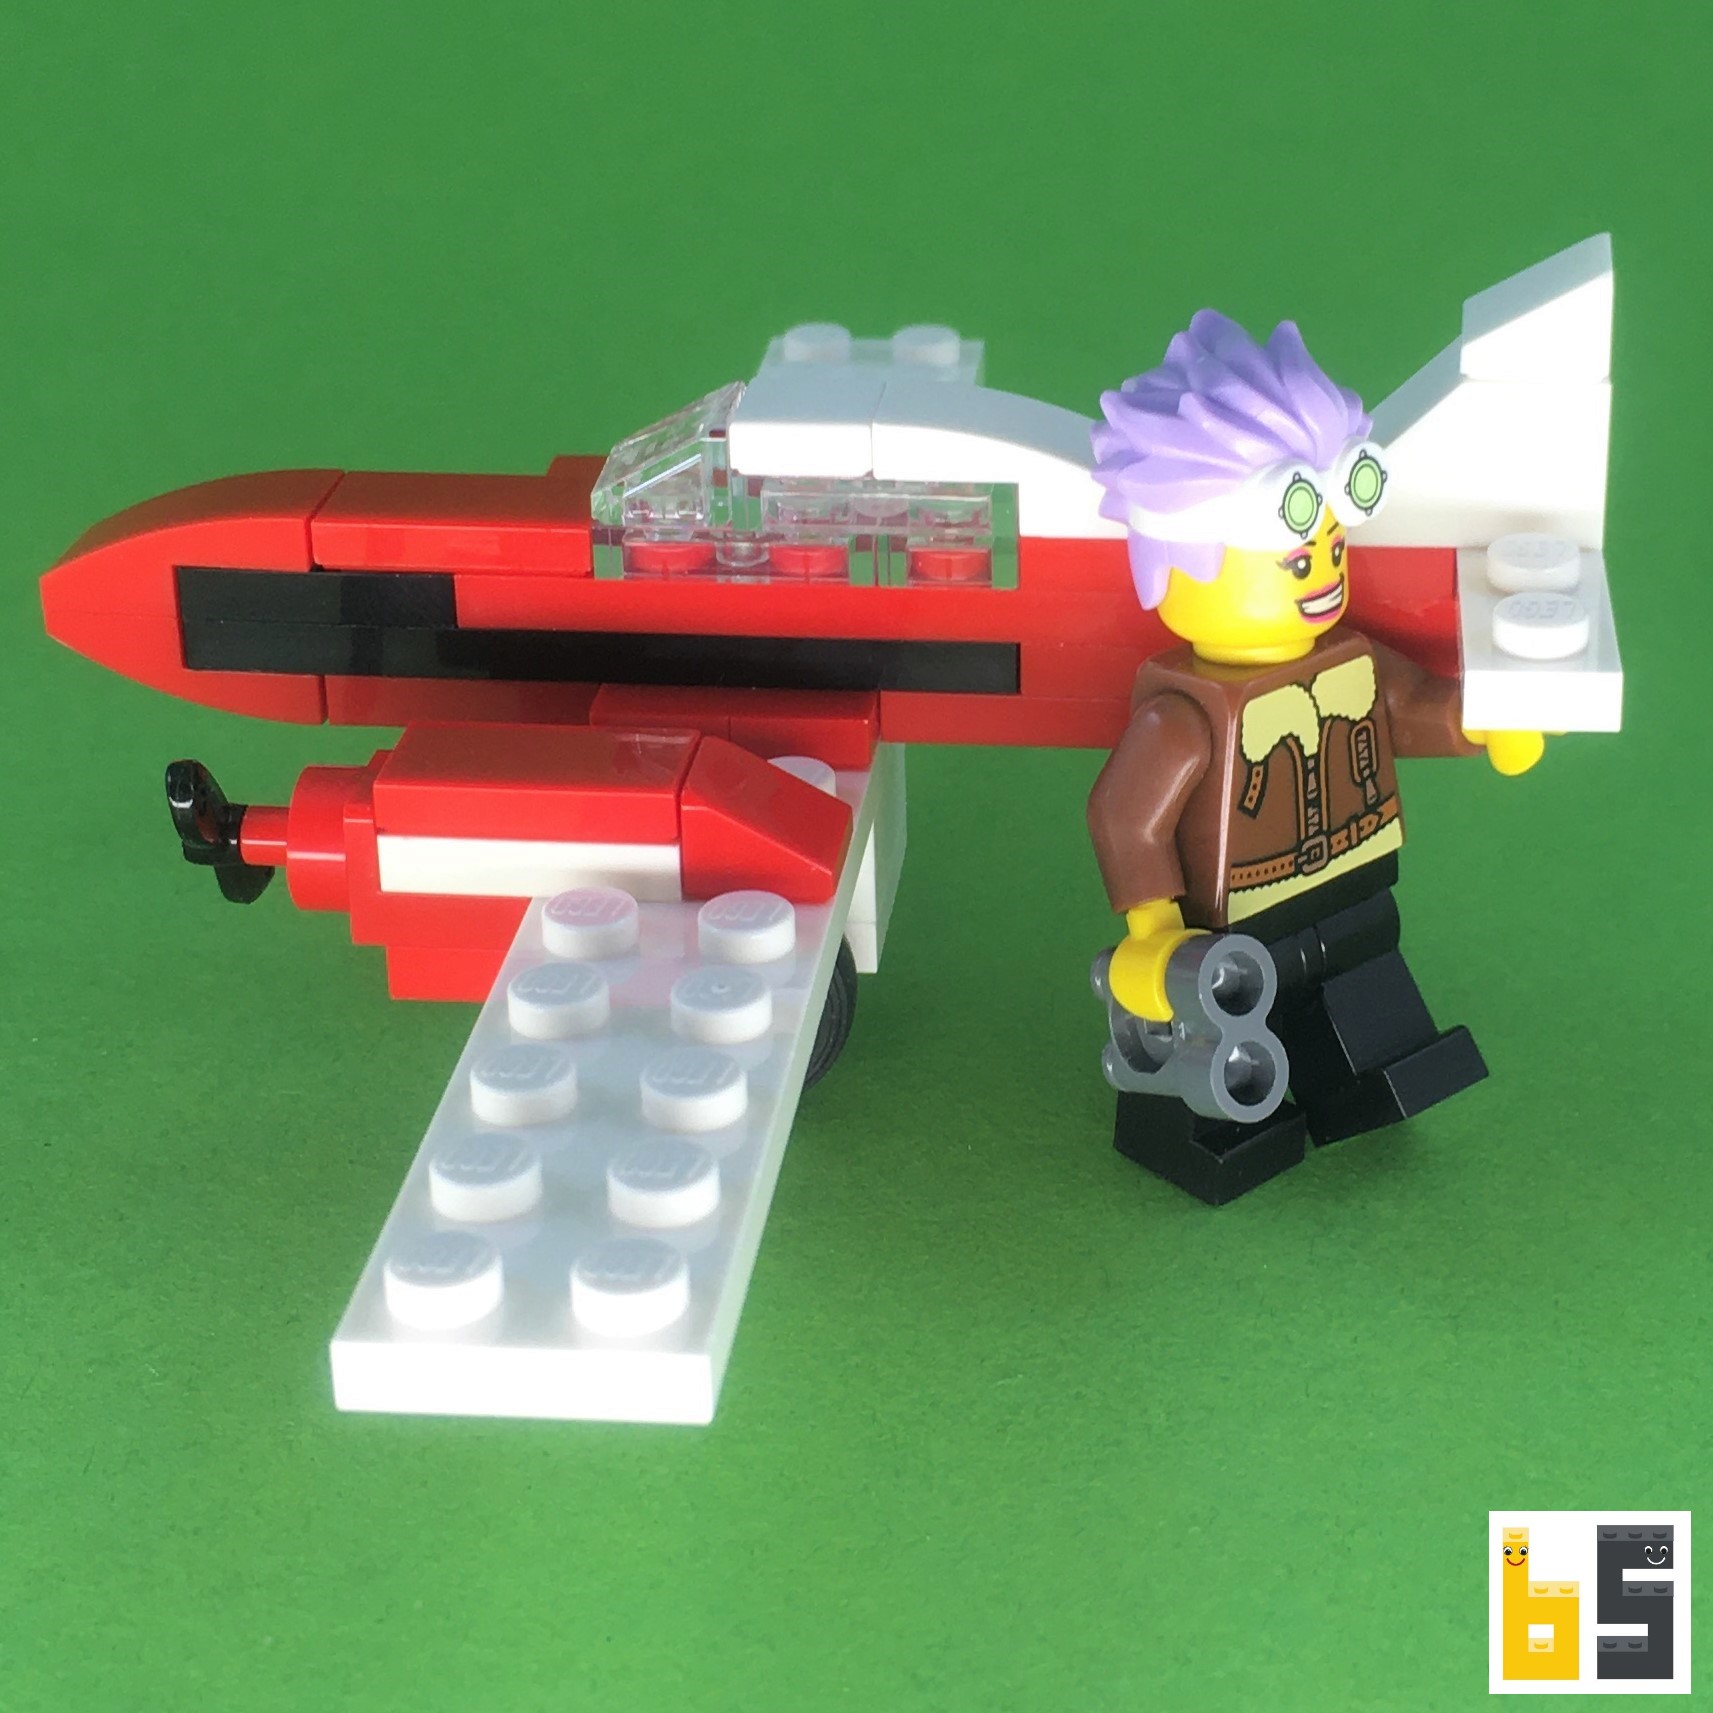 Read more about the article Flying LEGO around the world